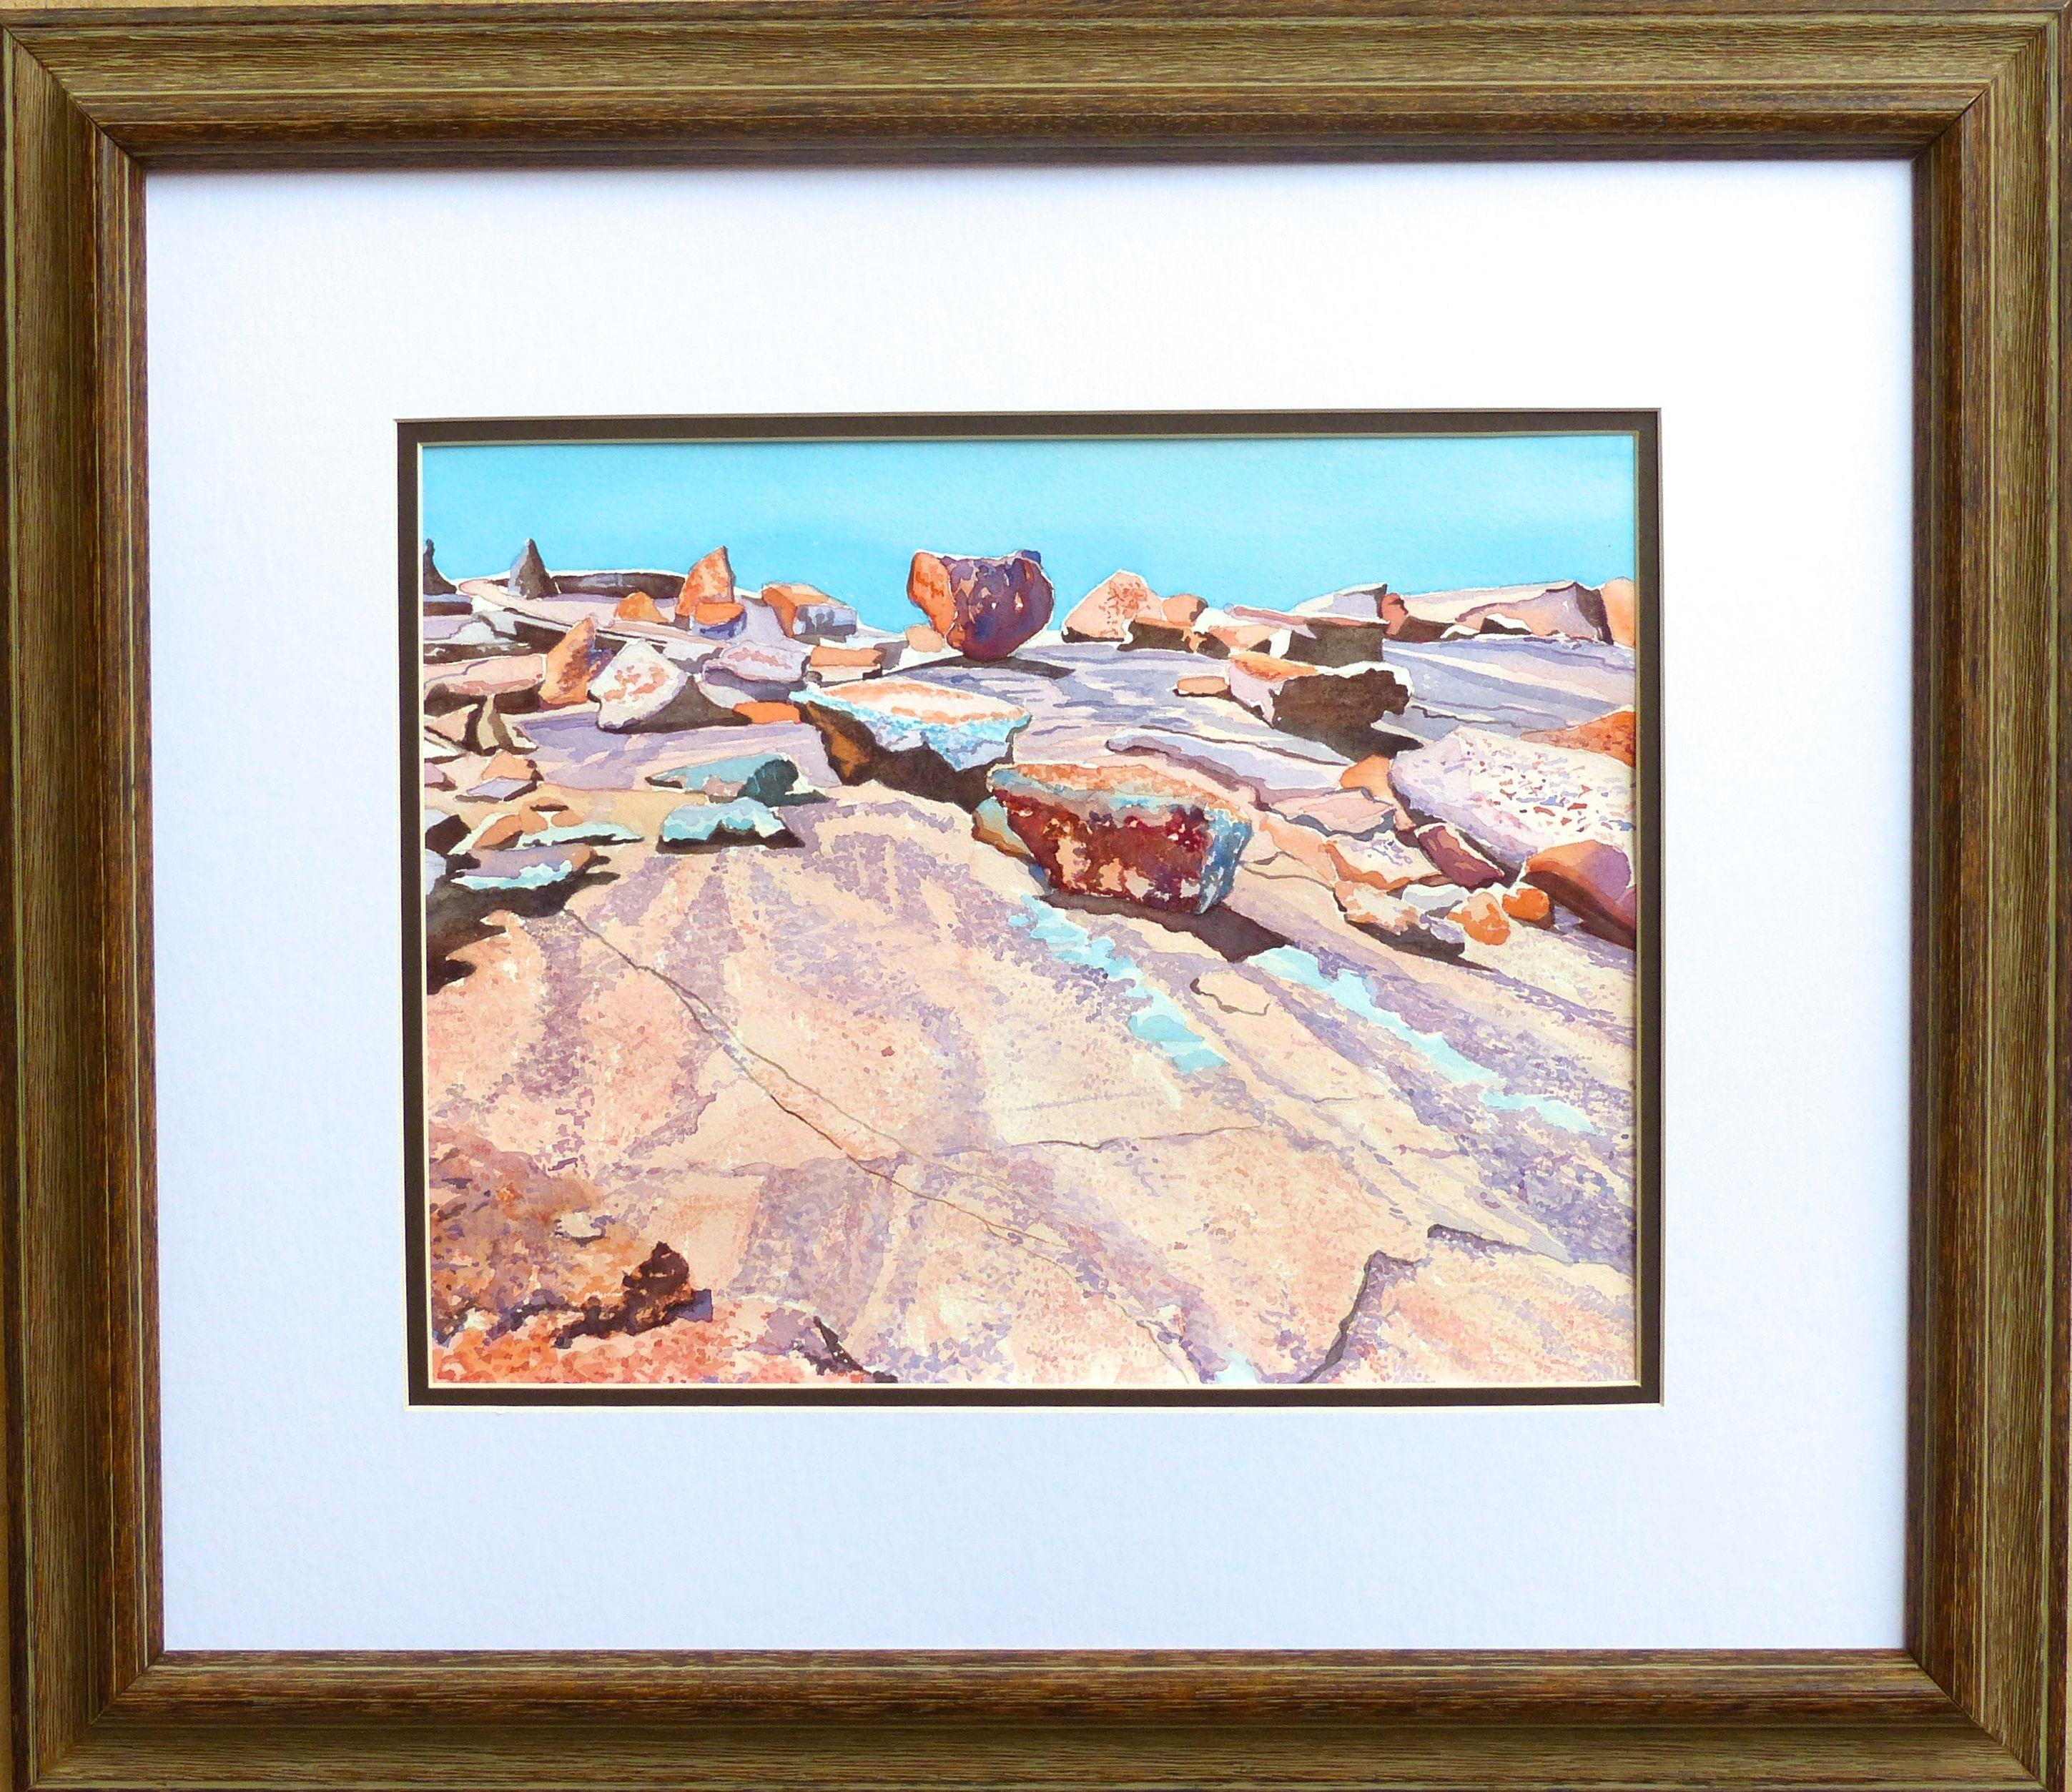 Hiking Enchanted Rock, Painting, Watercolor on Watercolor Paper - Realist Art by Leslie White